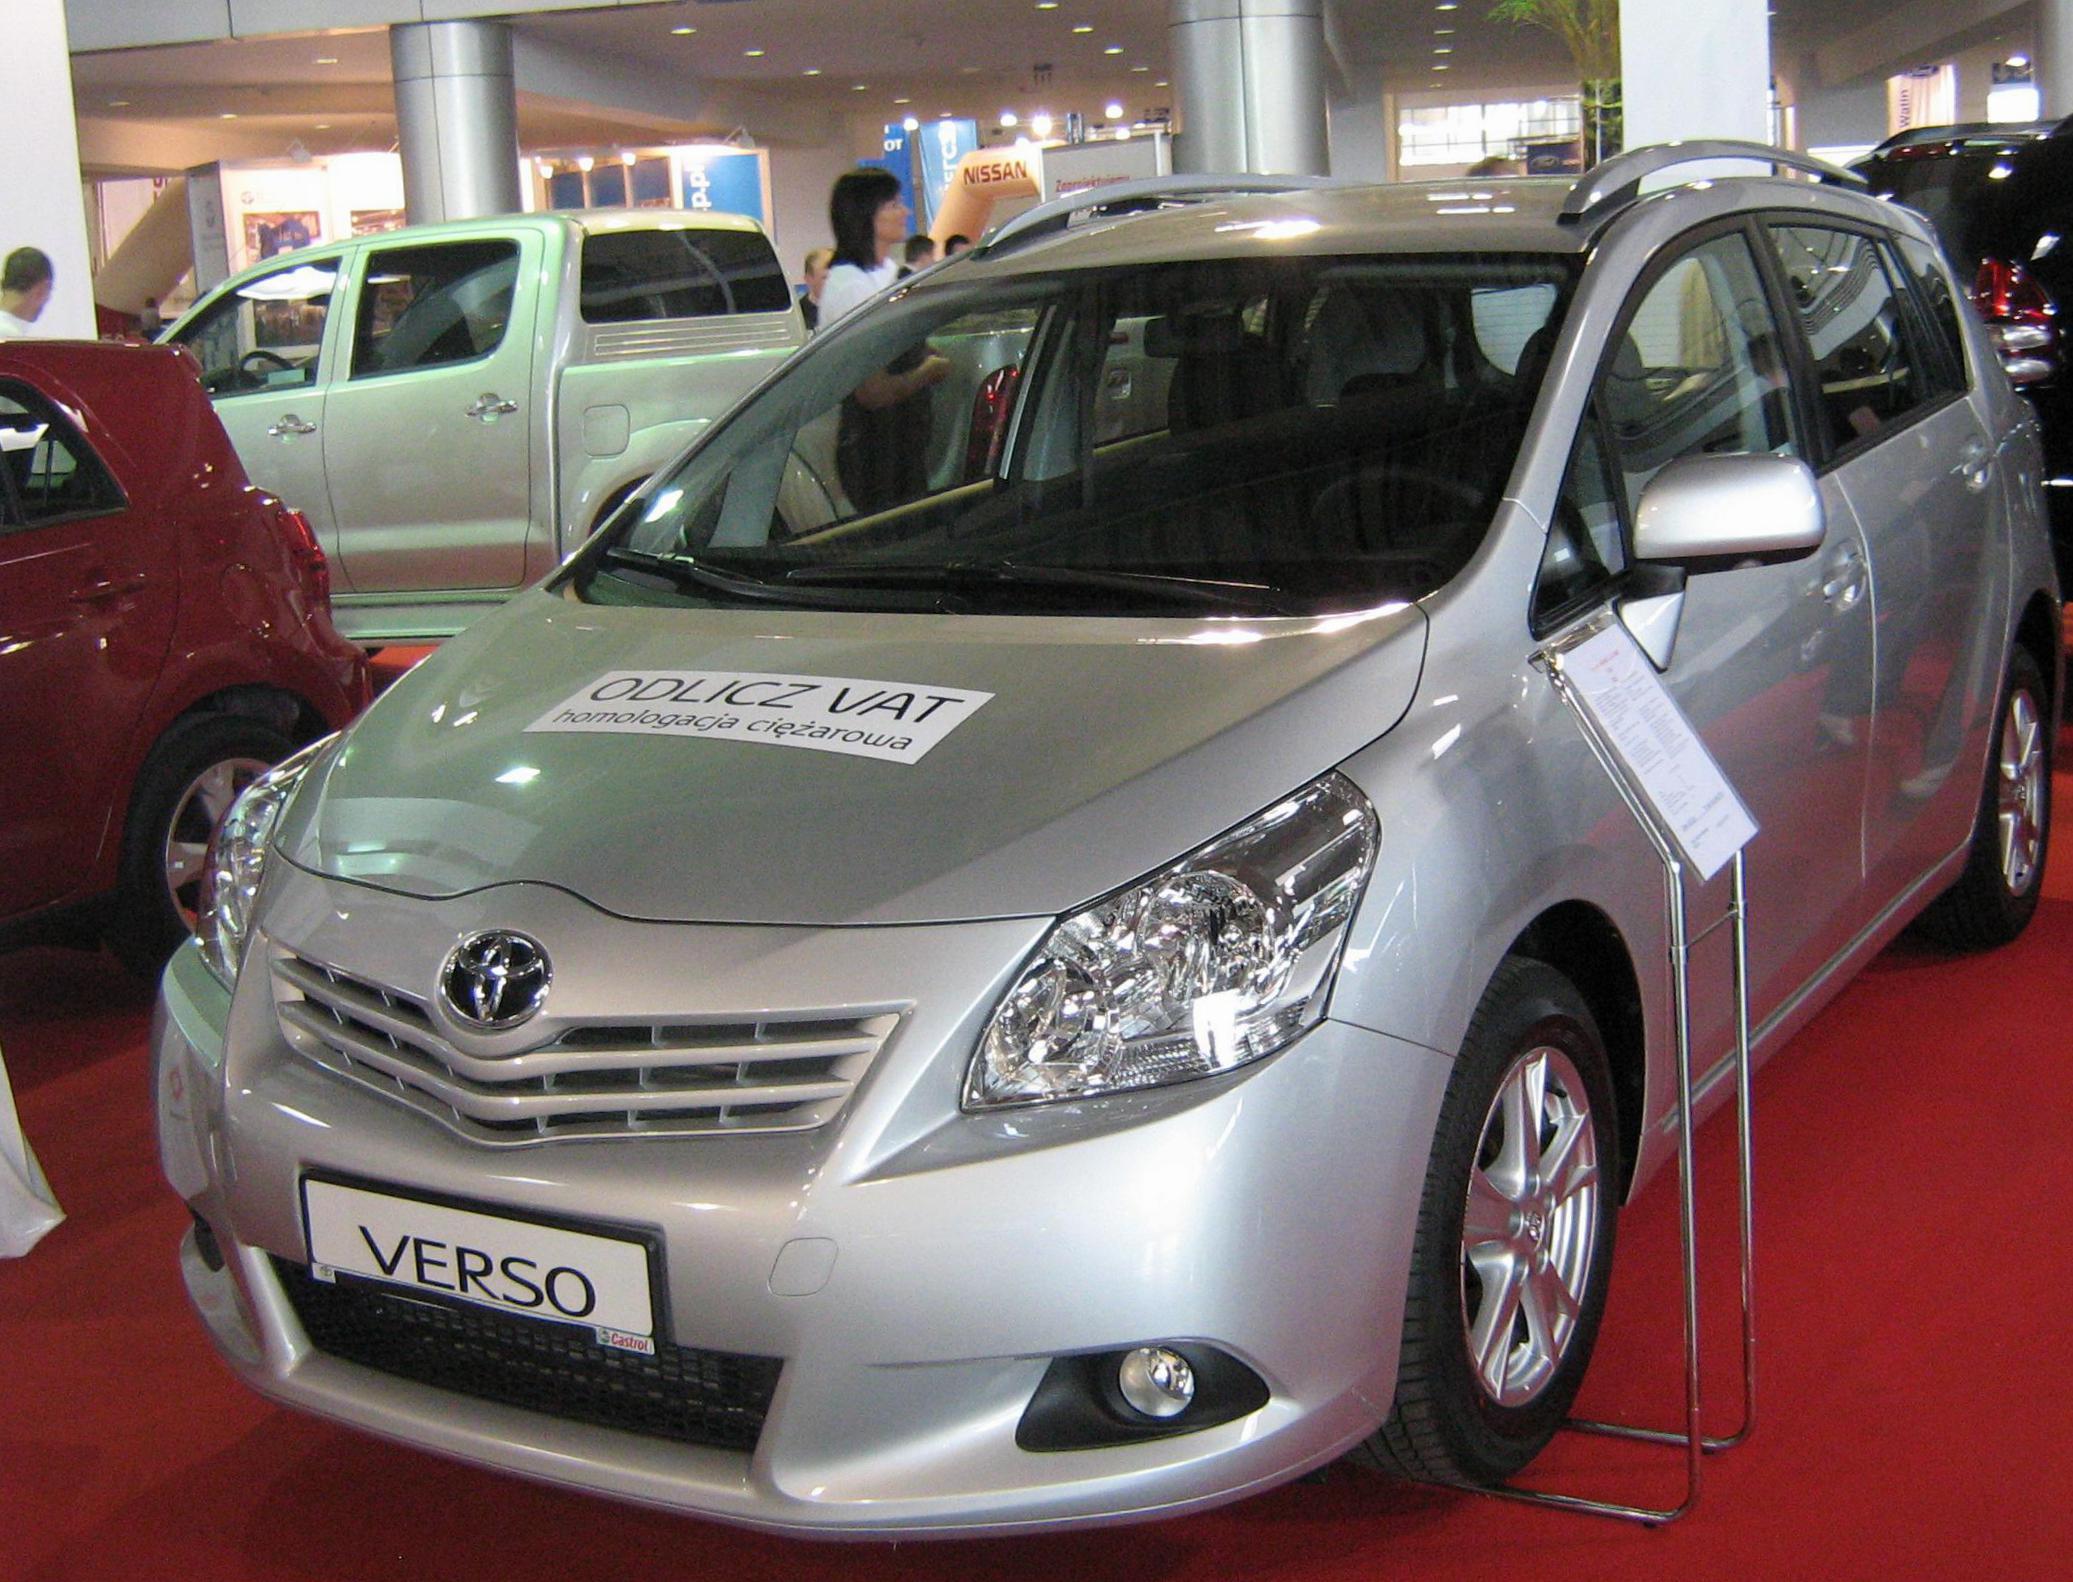 Verso Toyota lease 2010